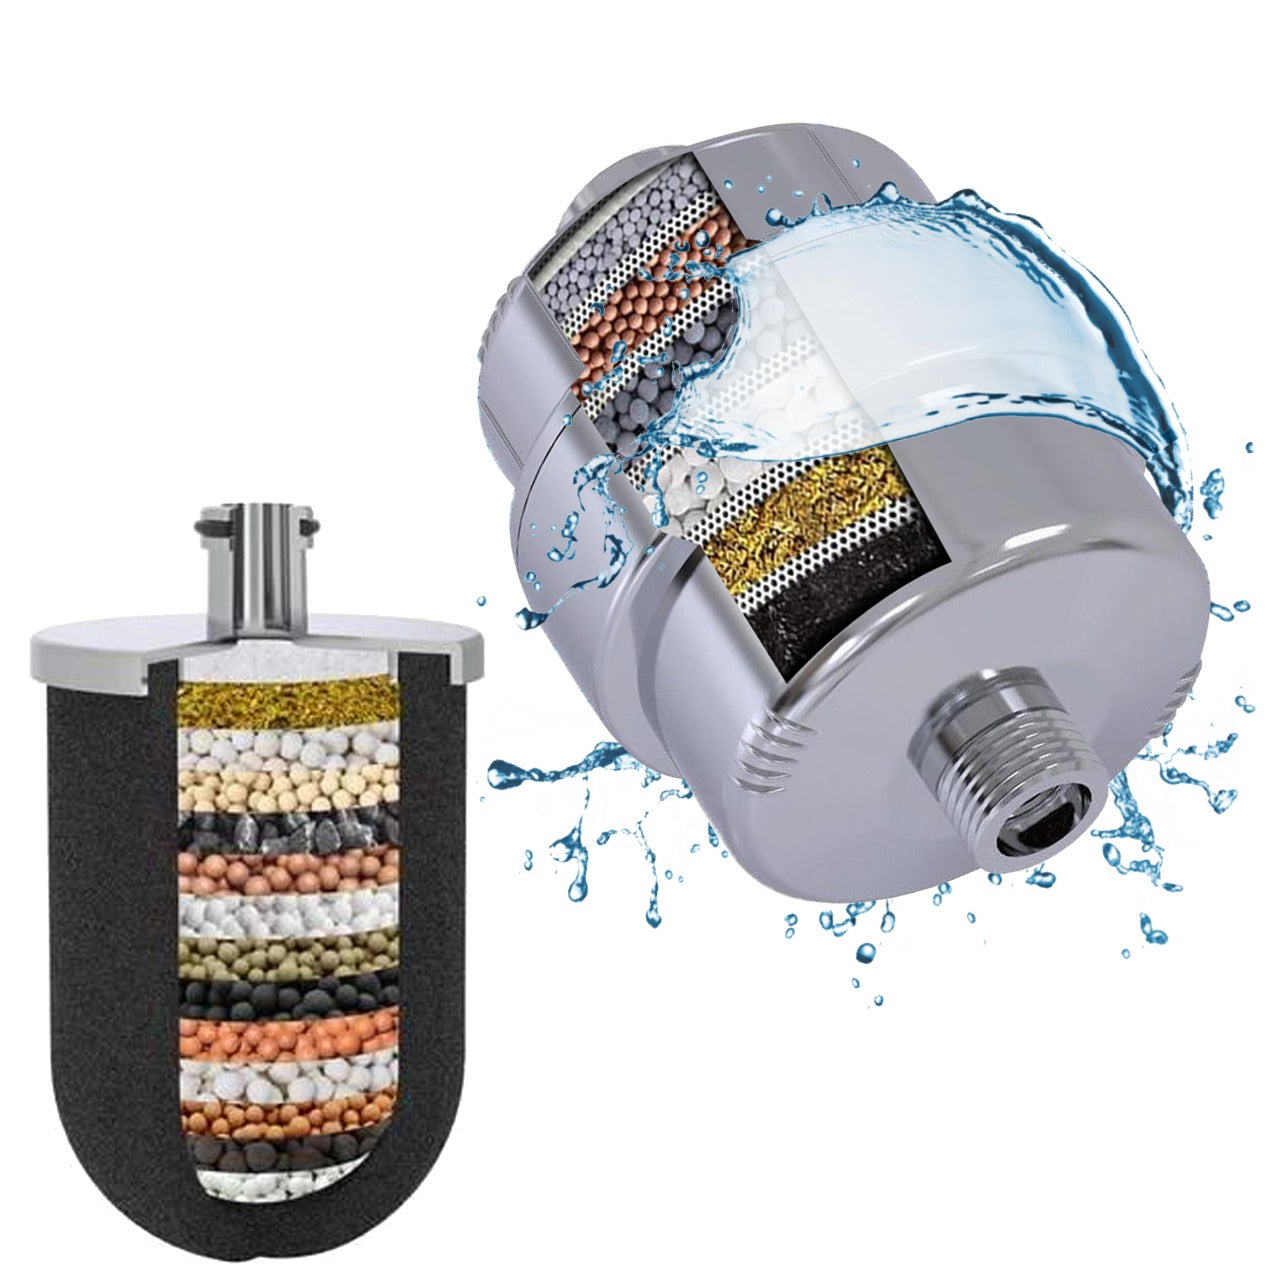 The Future of Shower Filtration: Innovative Technology Products Corp's Carbon Block Technology Takes Center Stage